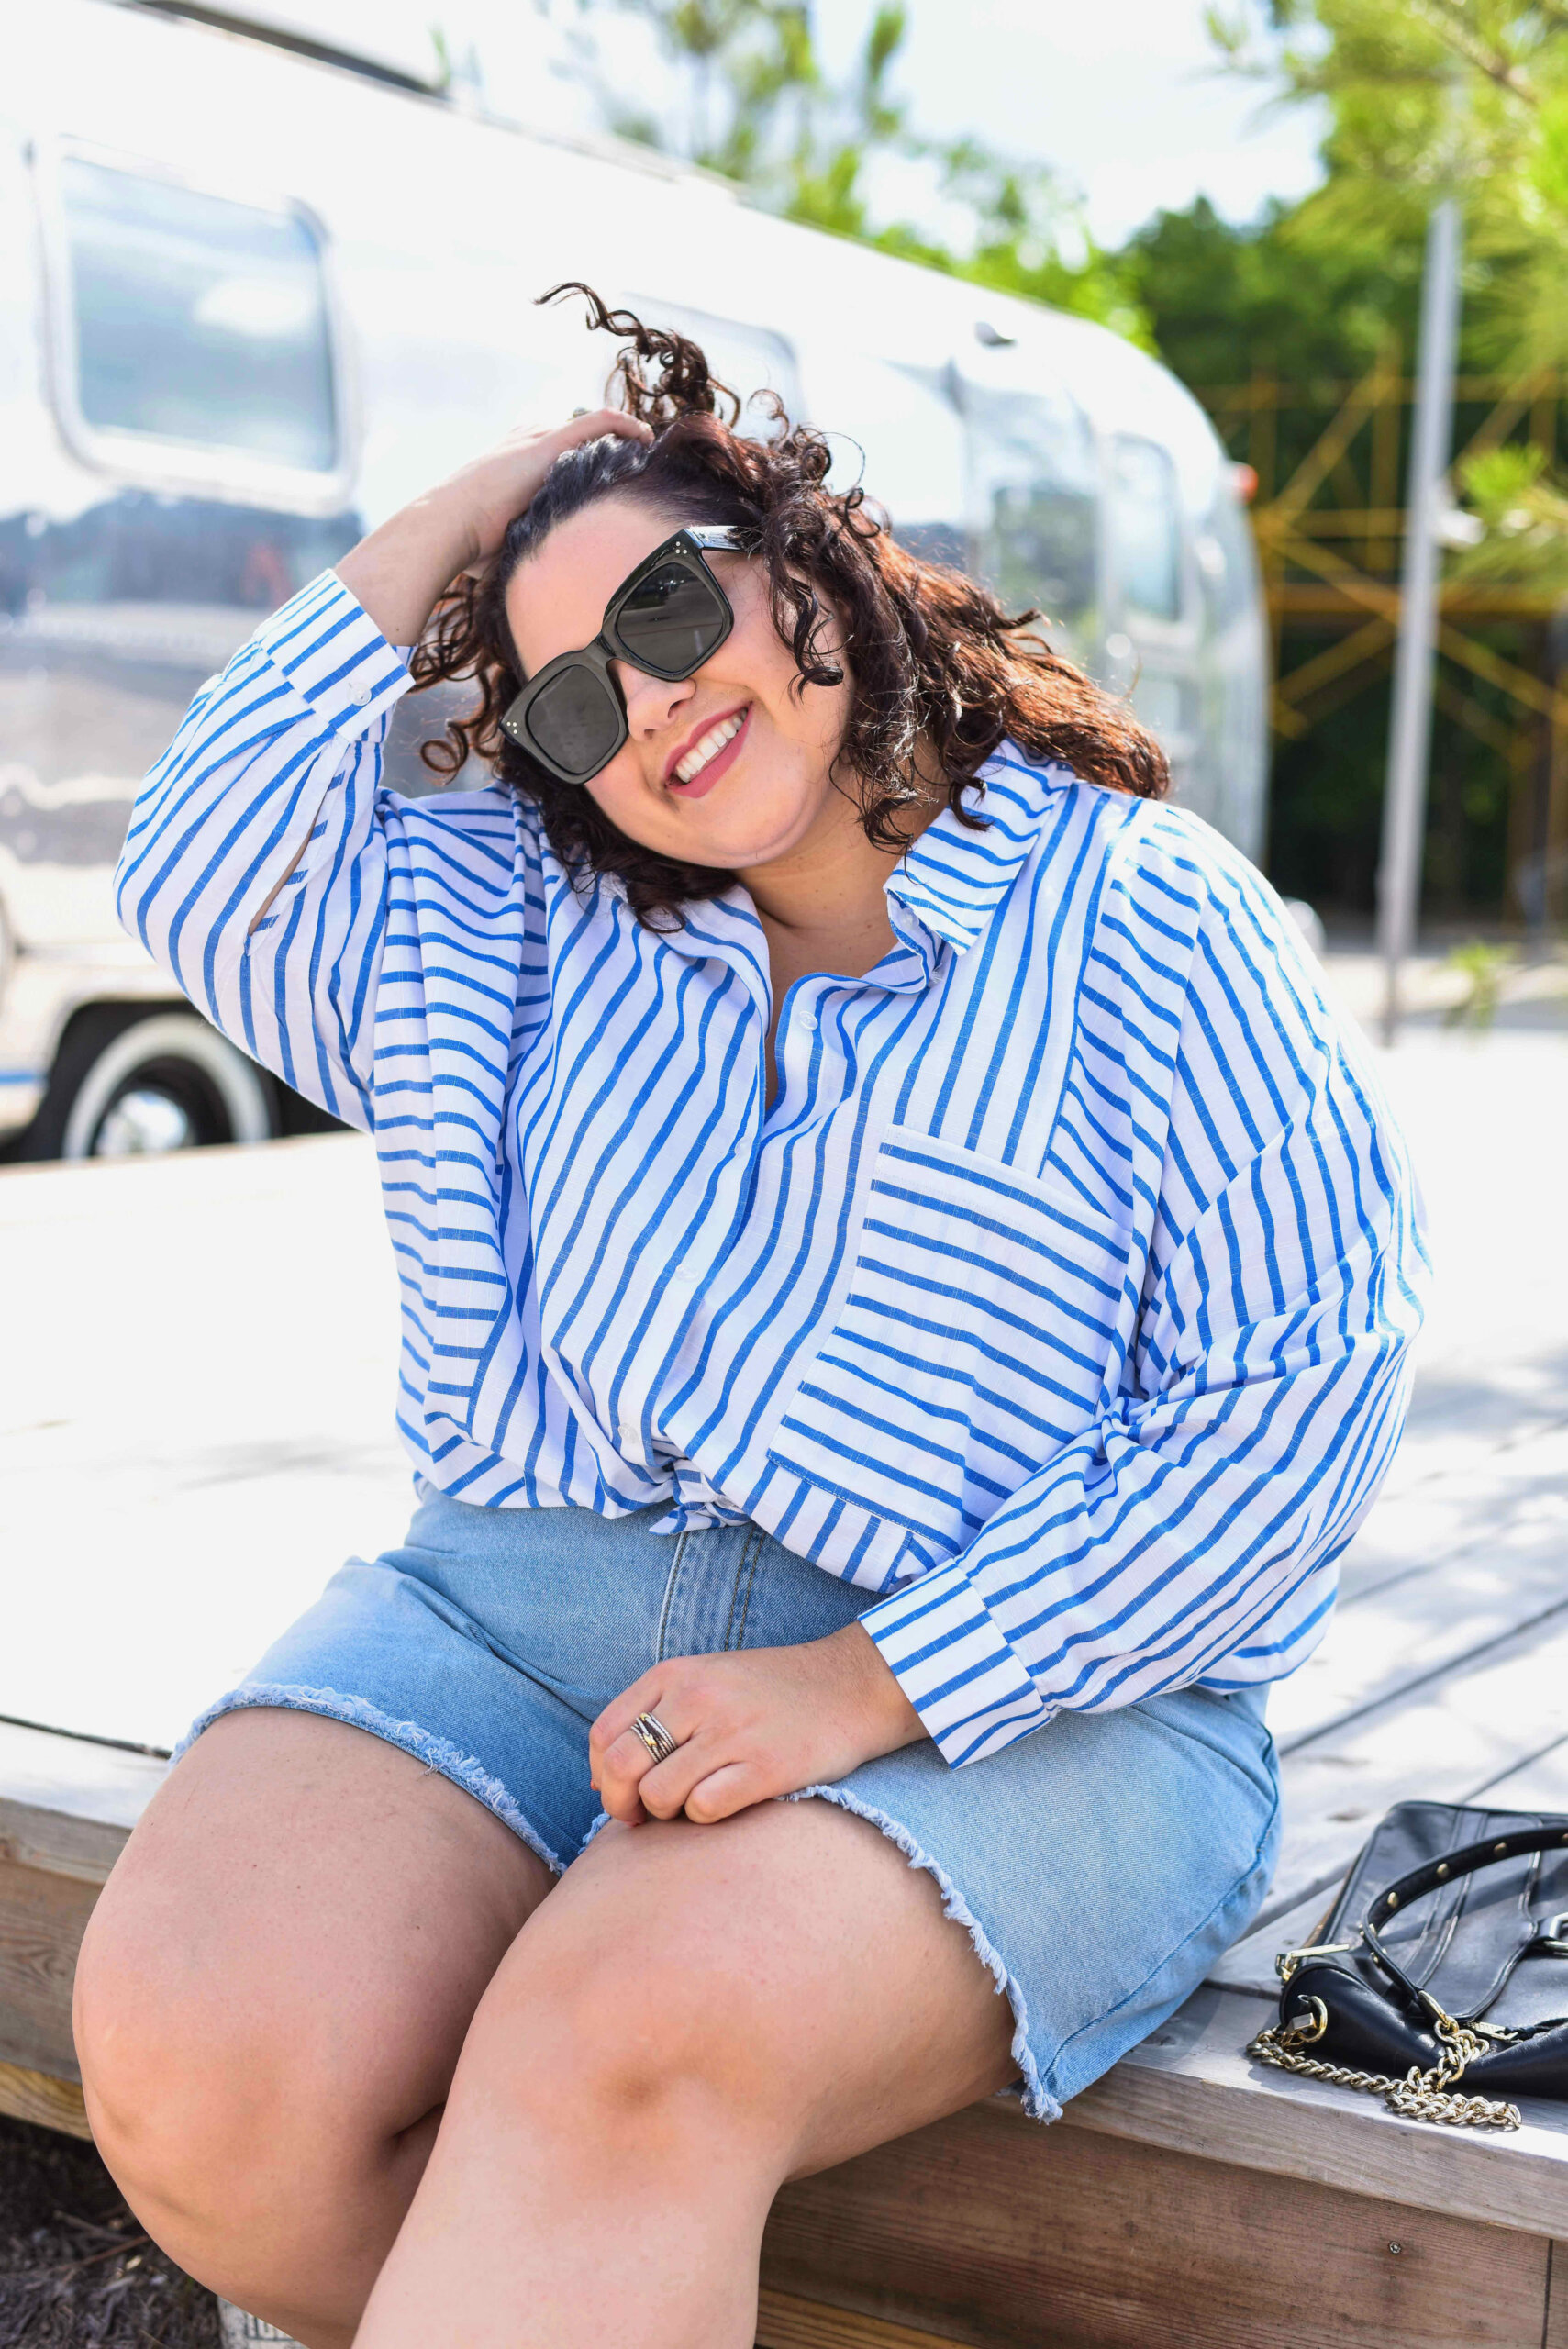 Being plus size does not mean you shouldn't wear the shorts of your summer girl dreams